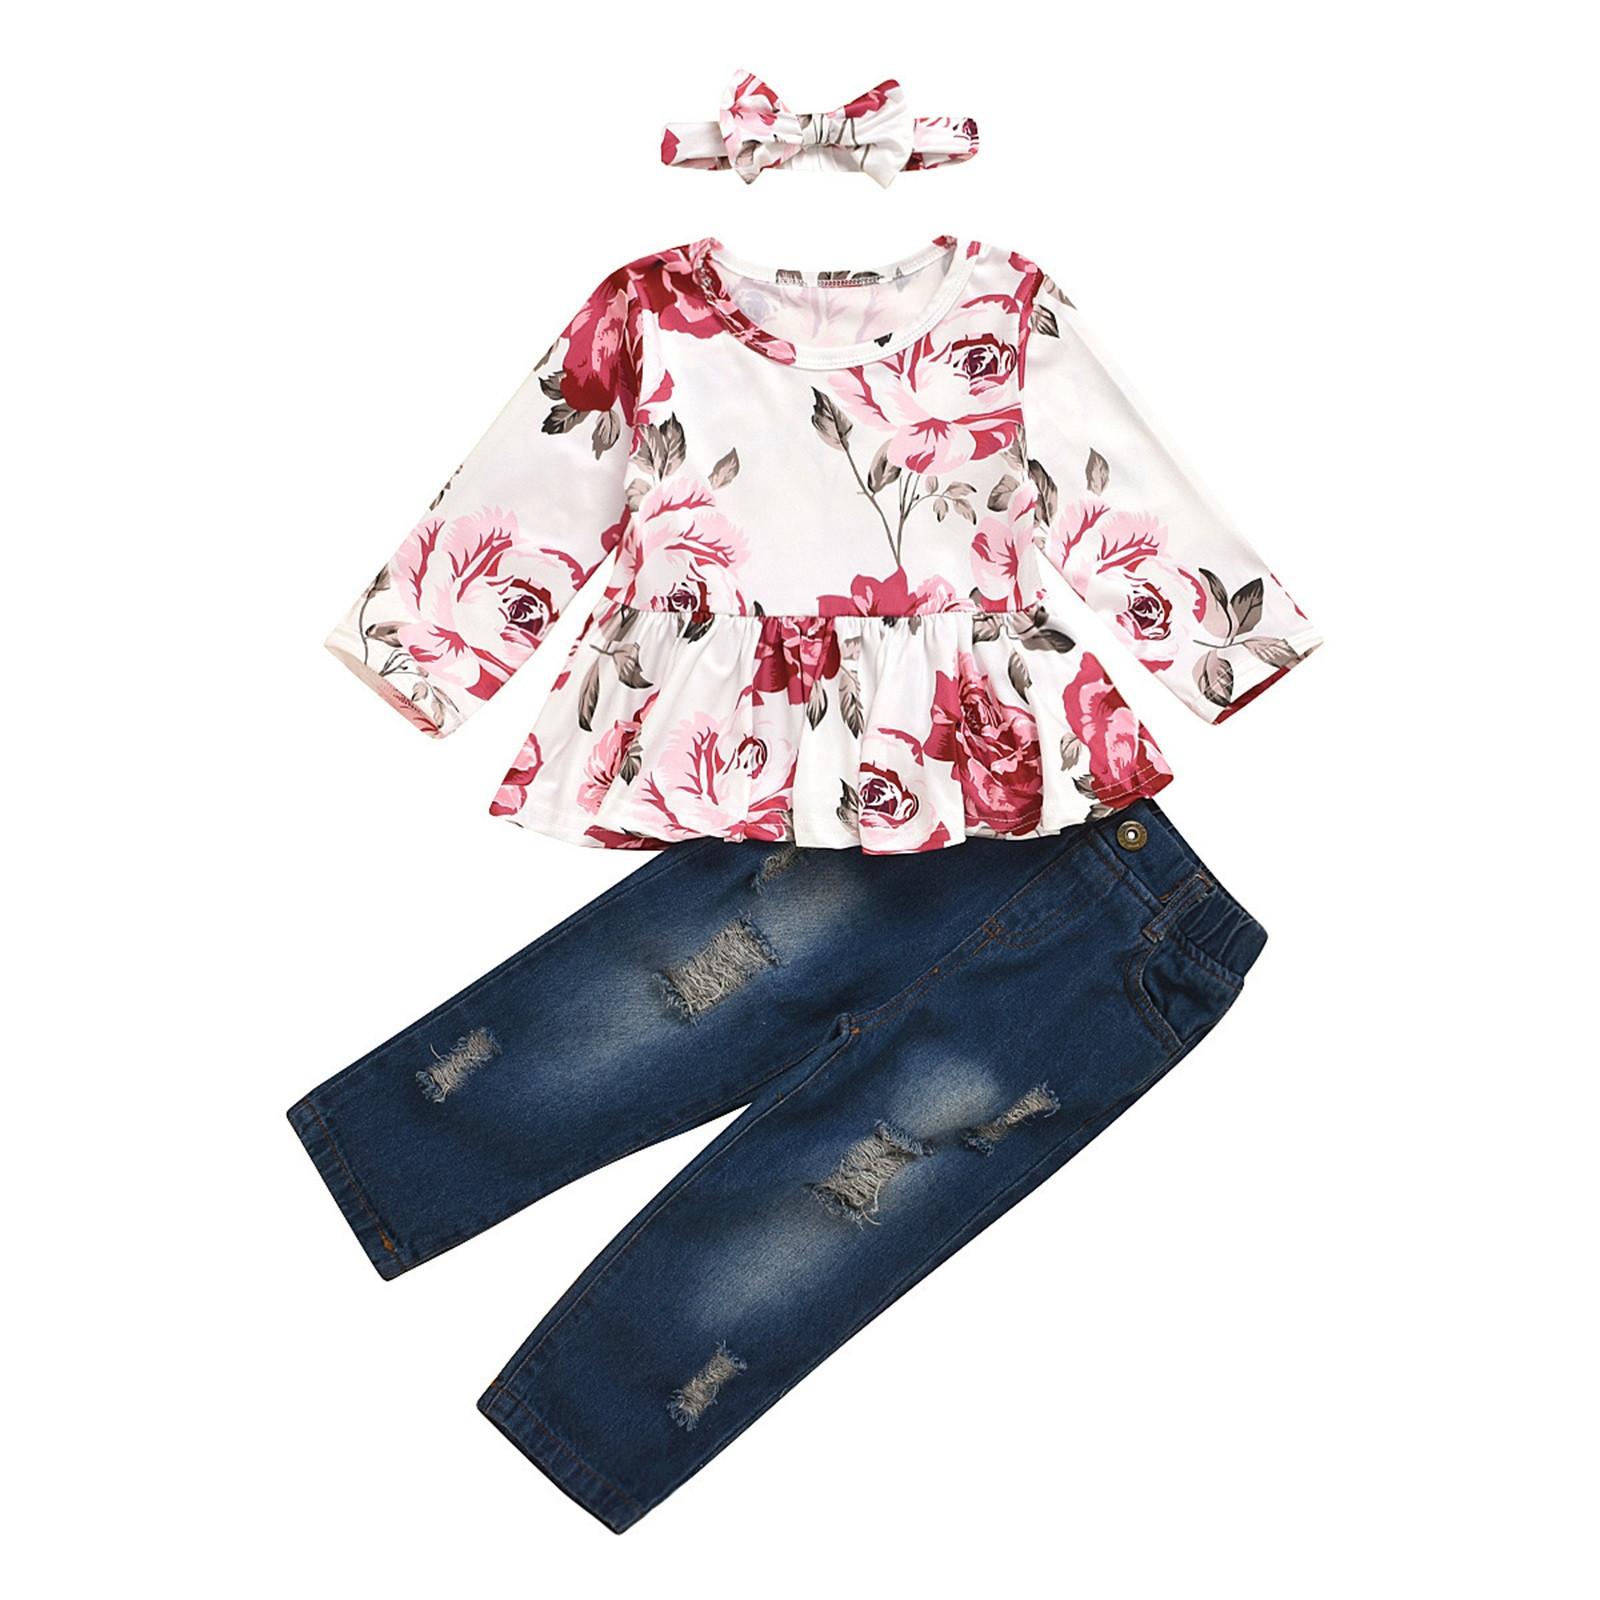 2DXuixsh Children Clothes Girls 3-6 Years Toddler Kids Child Baby Girls Long Sleeve Floral Print Tops Blouse Ripped Jeans Pant Trousers with Headbands Outfits Set 3Pcs 1 Month Old Girl Clothes A 90 - image 1 of 8